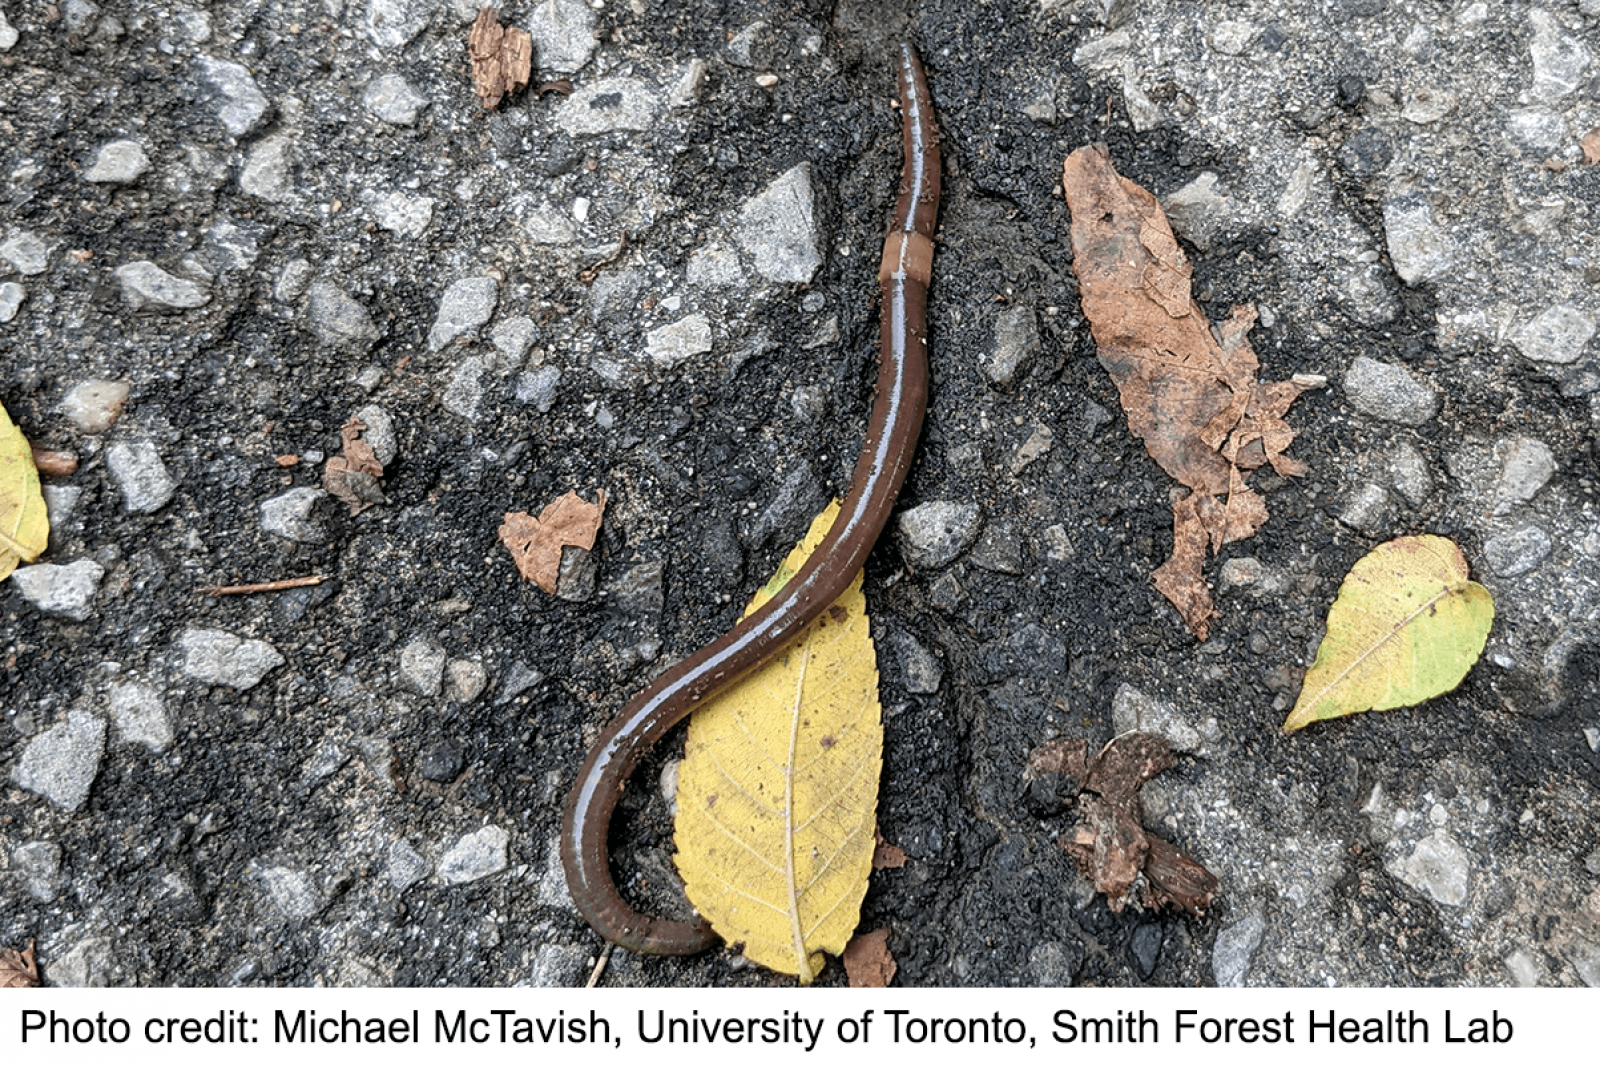 Invasive Asian jumping worm spotted in Ontario